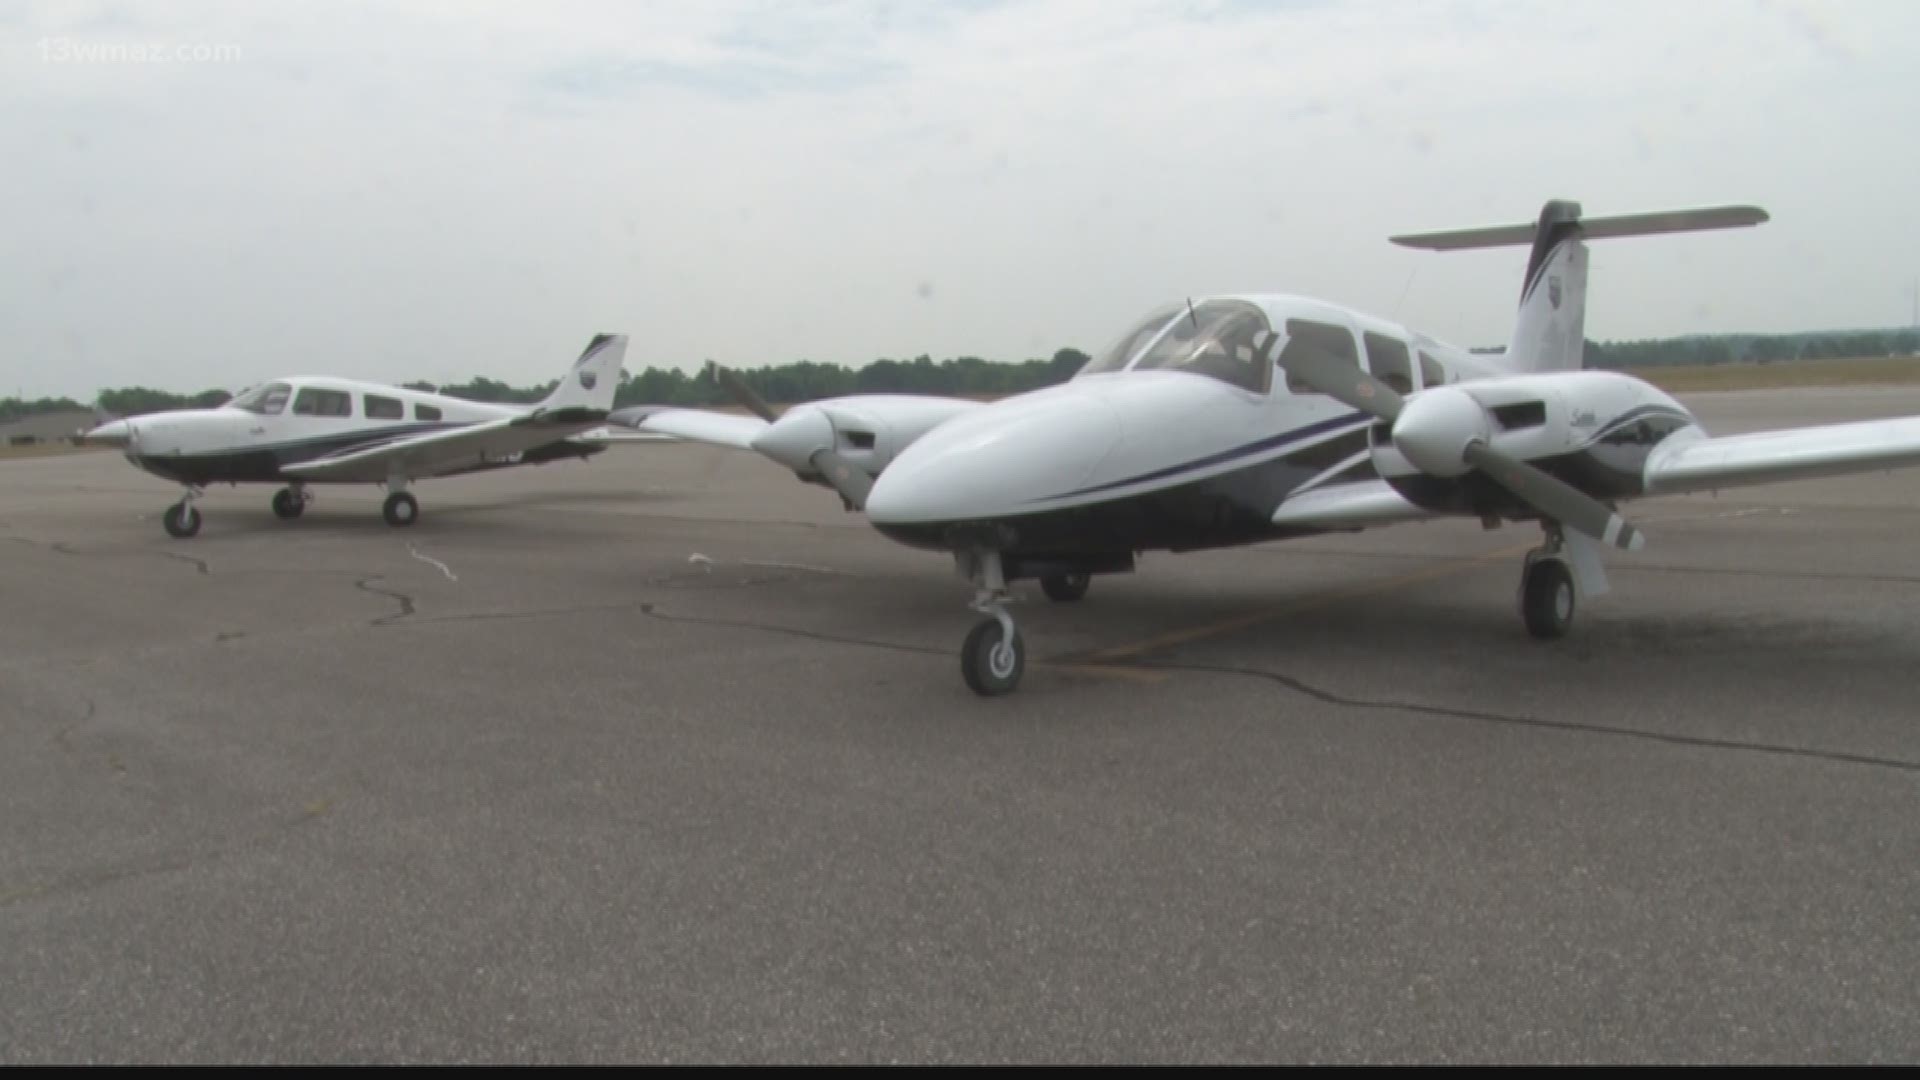 The sky is the limit for Middle Georgia State's aviation students now that new aircraft will open more spots in the flying programs at their Macon campus.